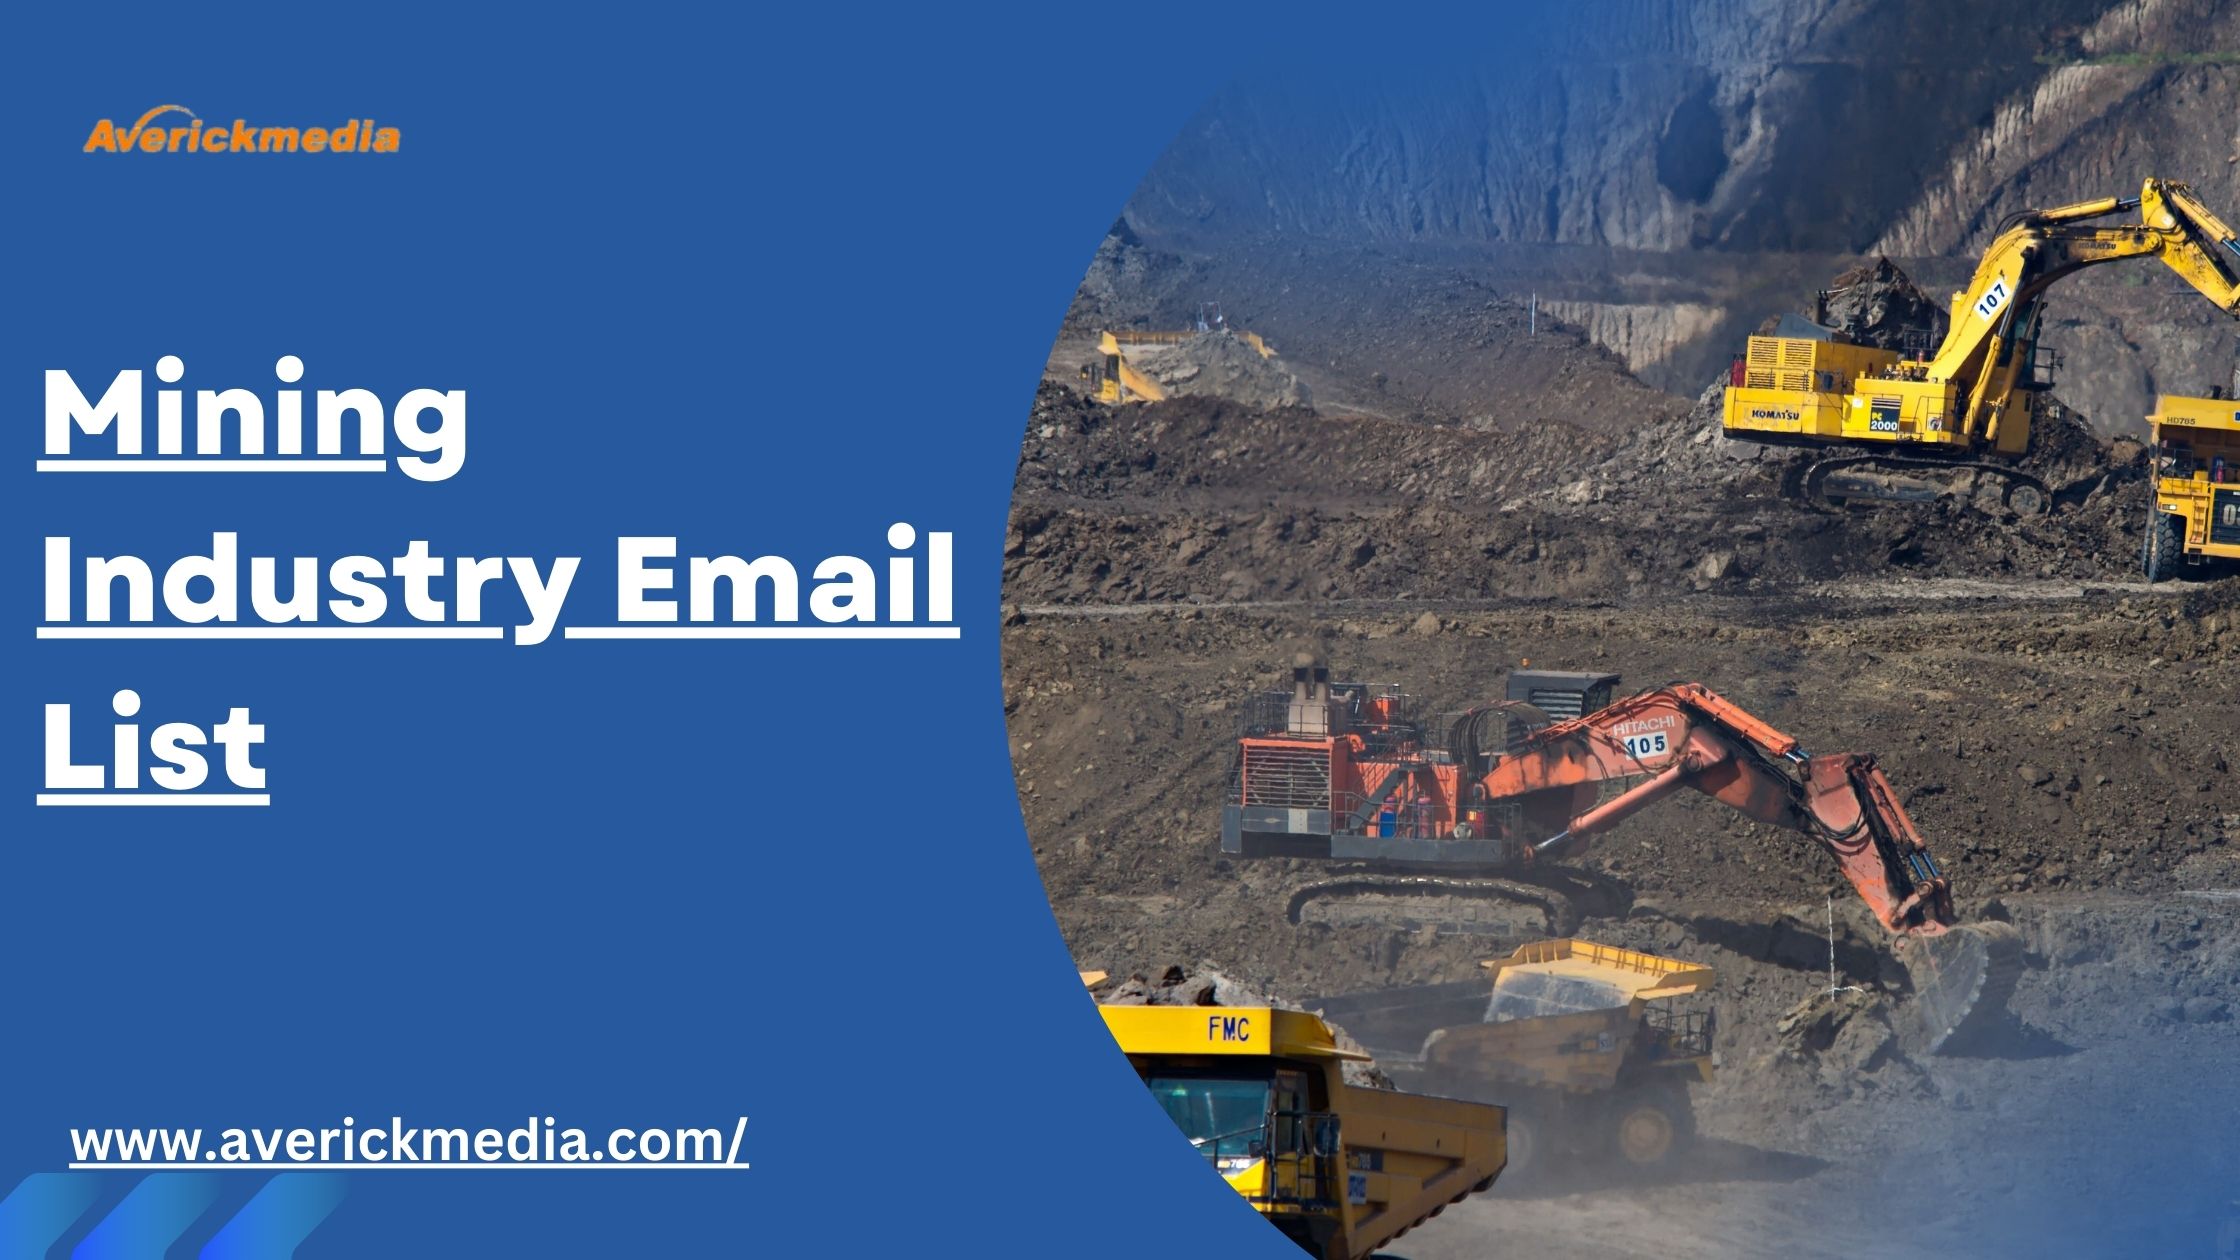 How to get the quality Mining industry lists?